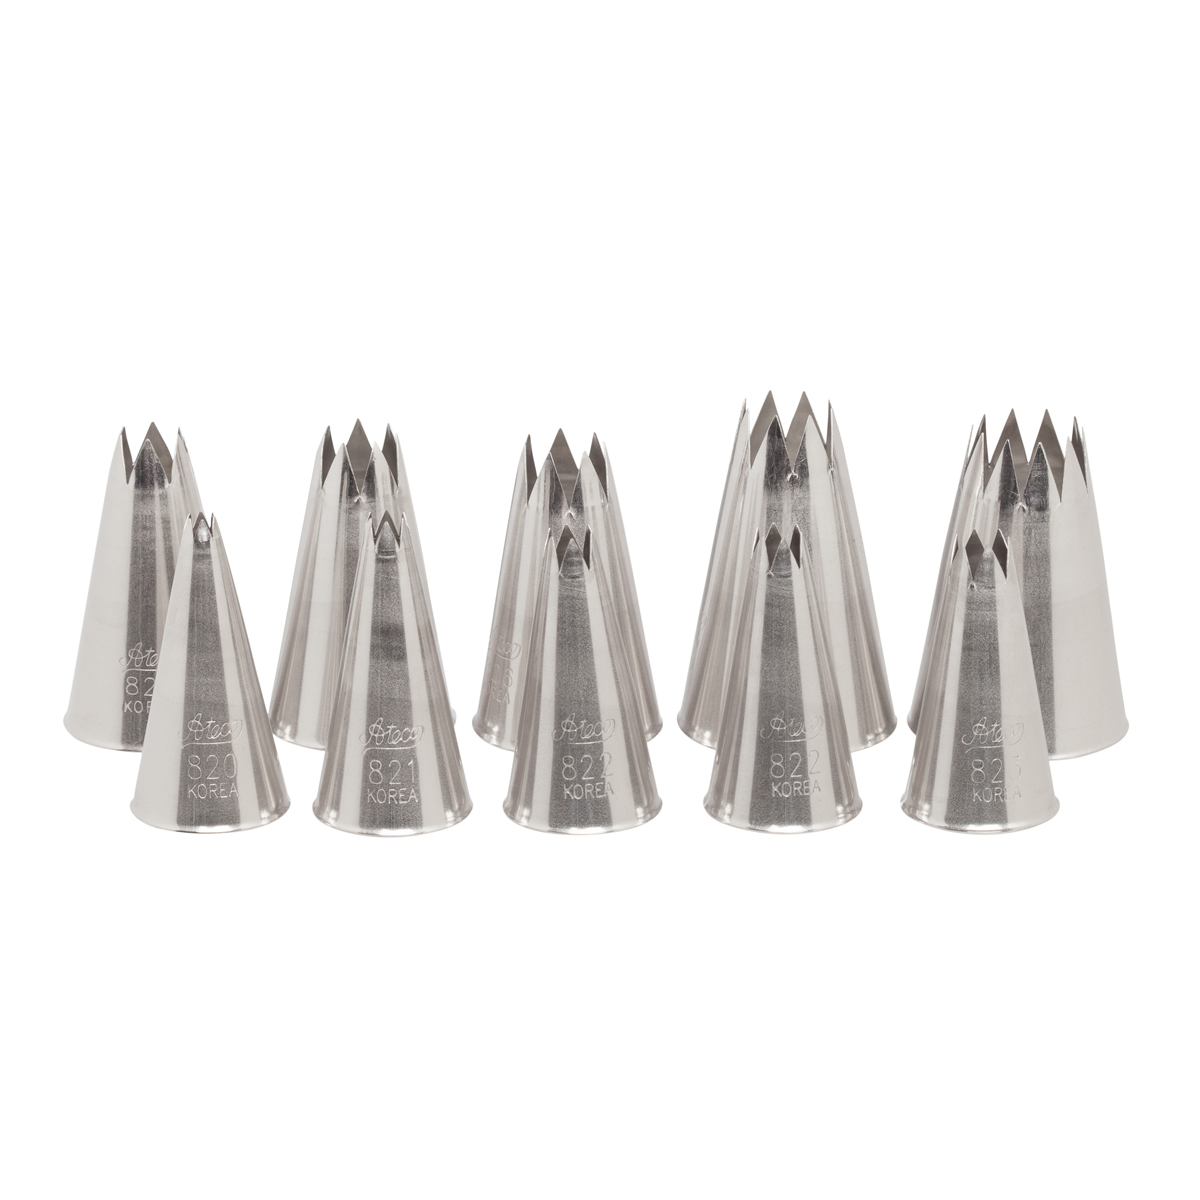 Ateco 830 Open Star 10-Piece Decorating Pastry Tube Set Set of 10 Asst.